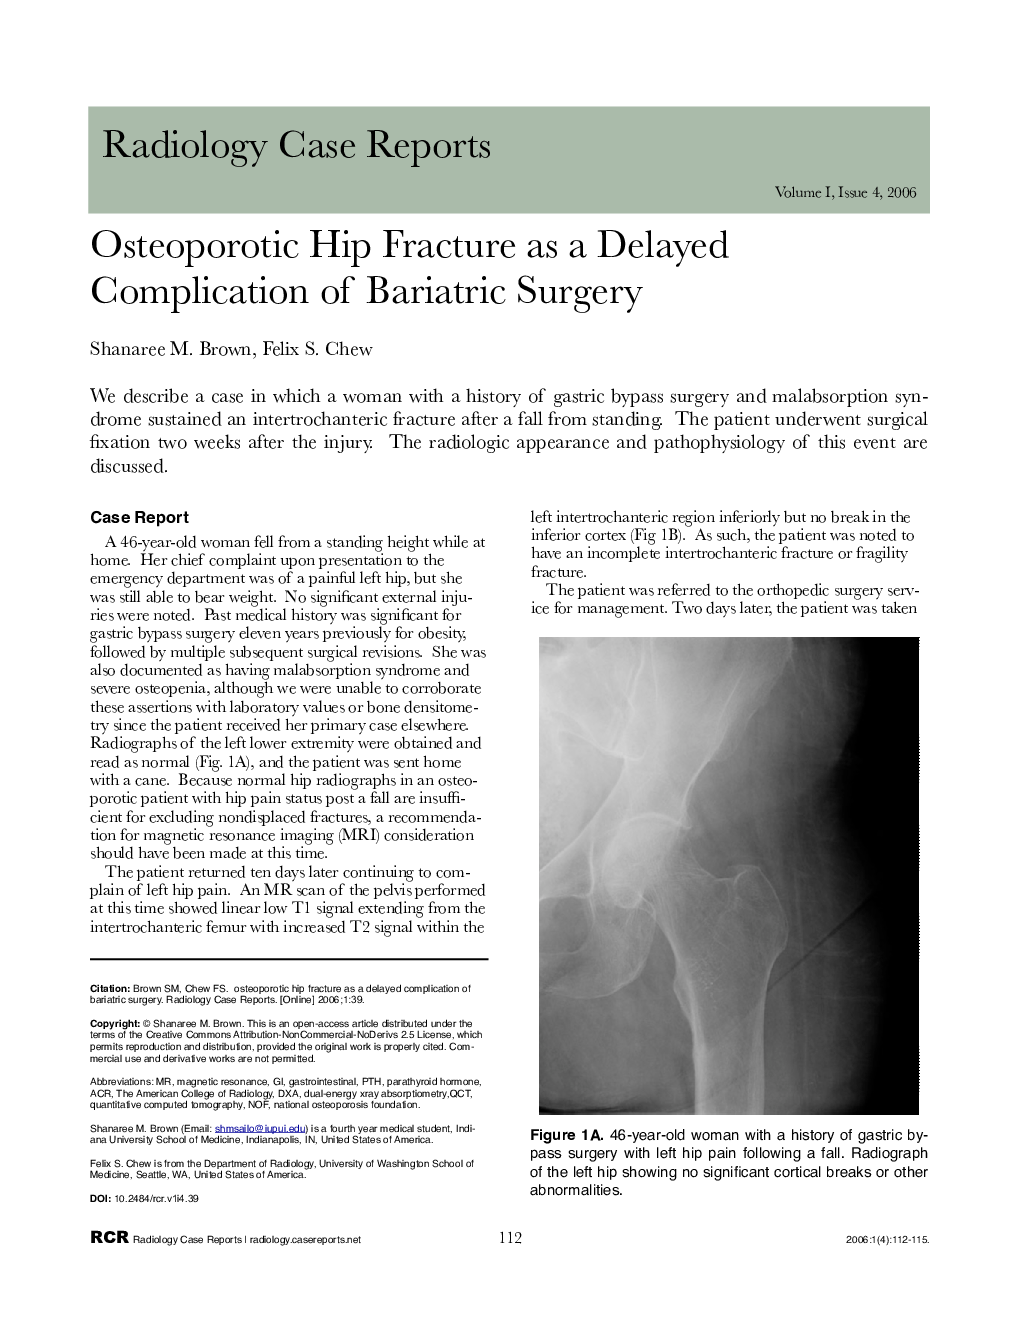 Osteoporotic Hip Fracture as a Delayed Complication of Bariatric Surgery 